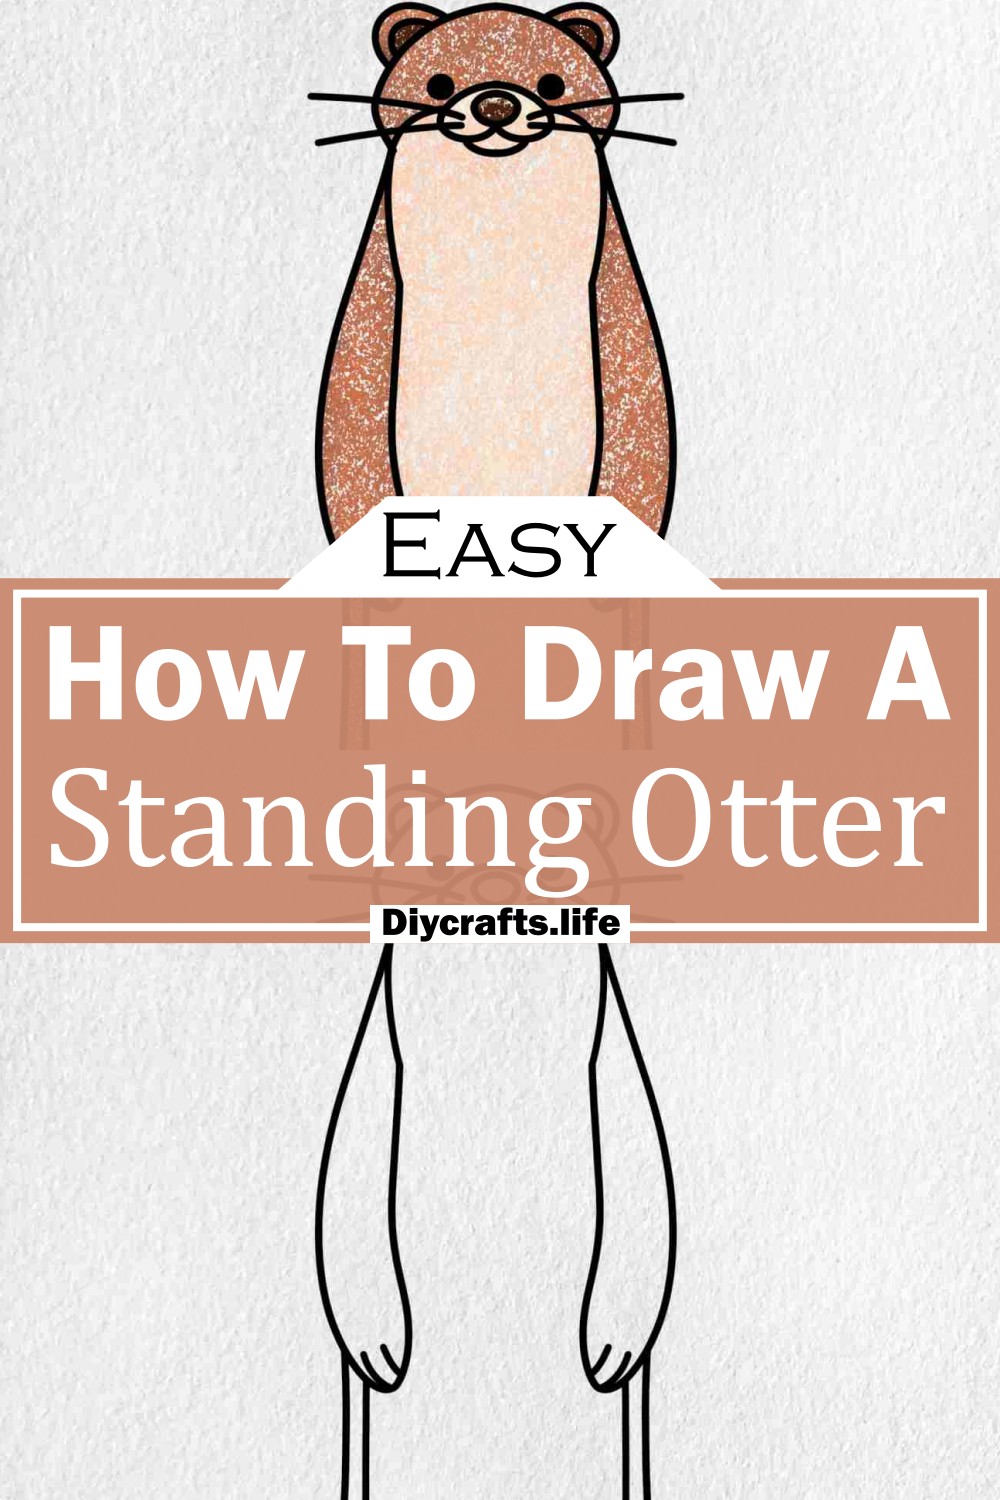 How To Draw A Standing Otter